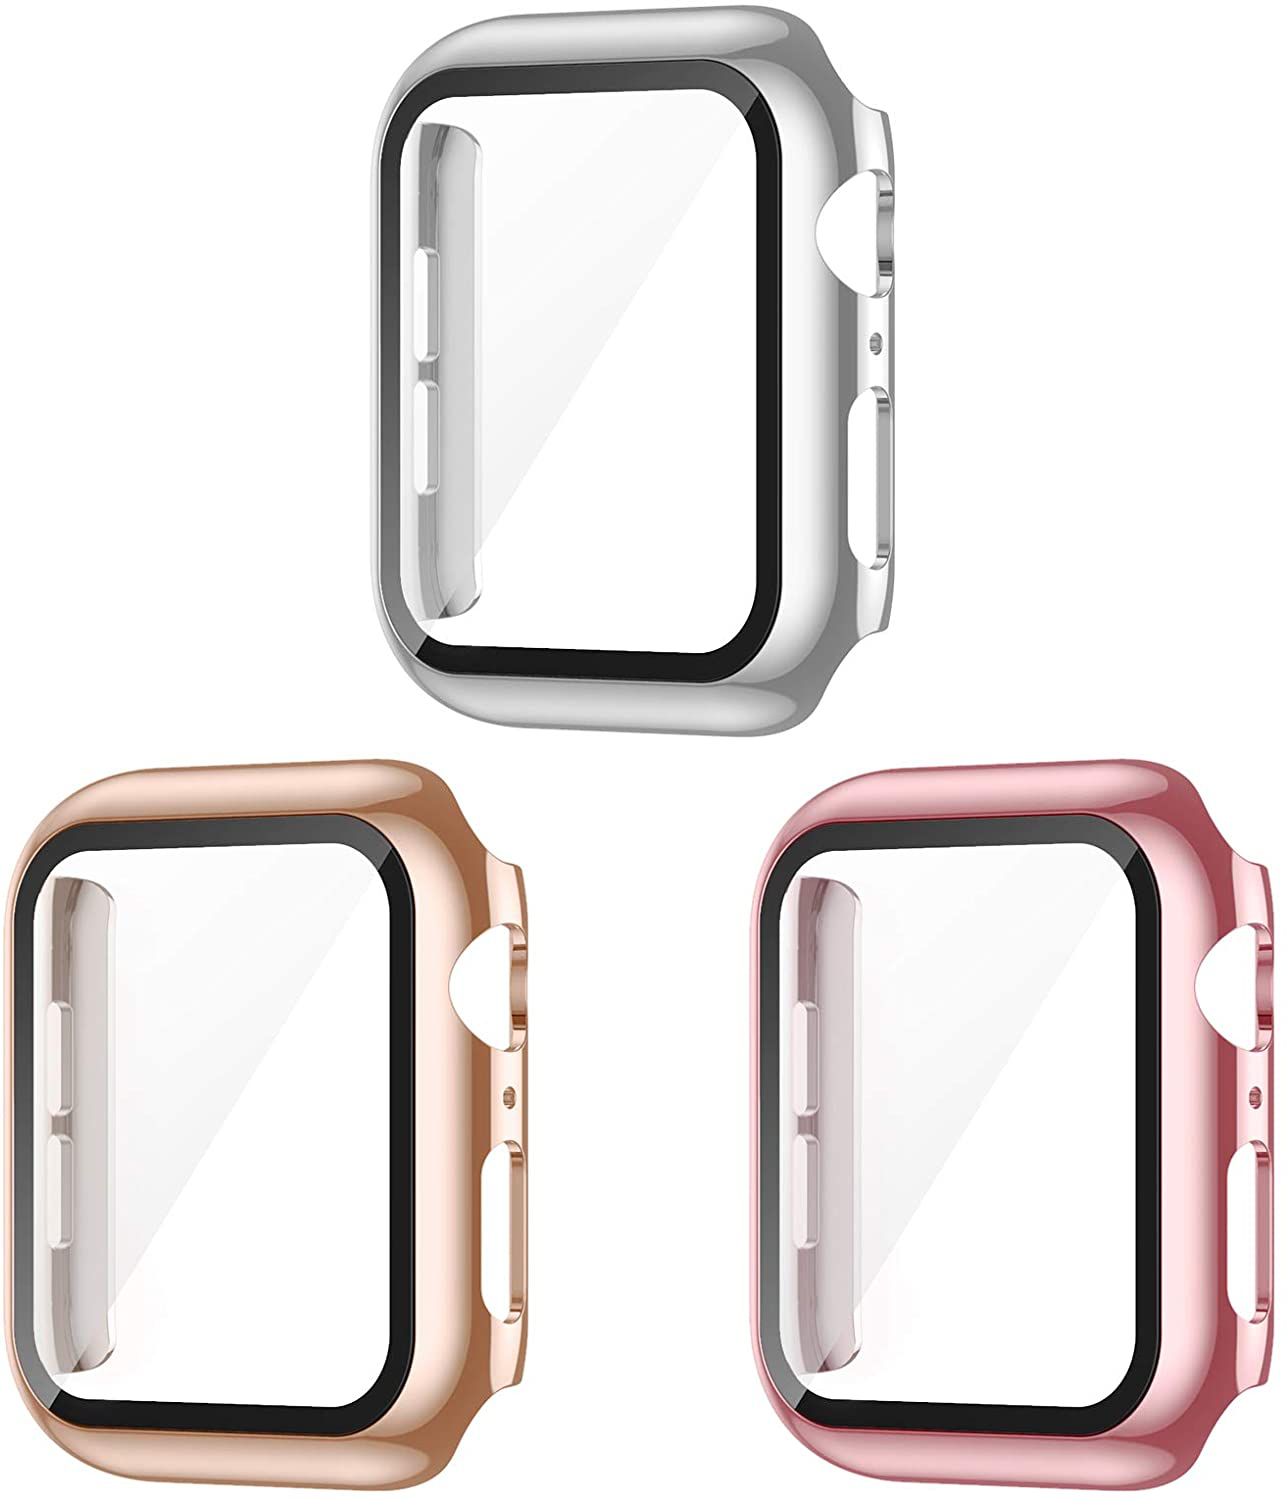 AVIDDA 3 Pack Case with Tempered Glass Screen Protector for Apple Watch 38mm Series 3/2/1, Slim Guard Bumper Full Coverage HD Ultra-Thin Cover Compatible with iWatch 38mm